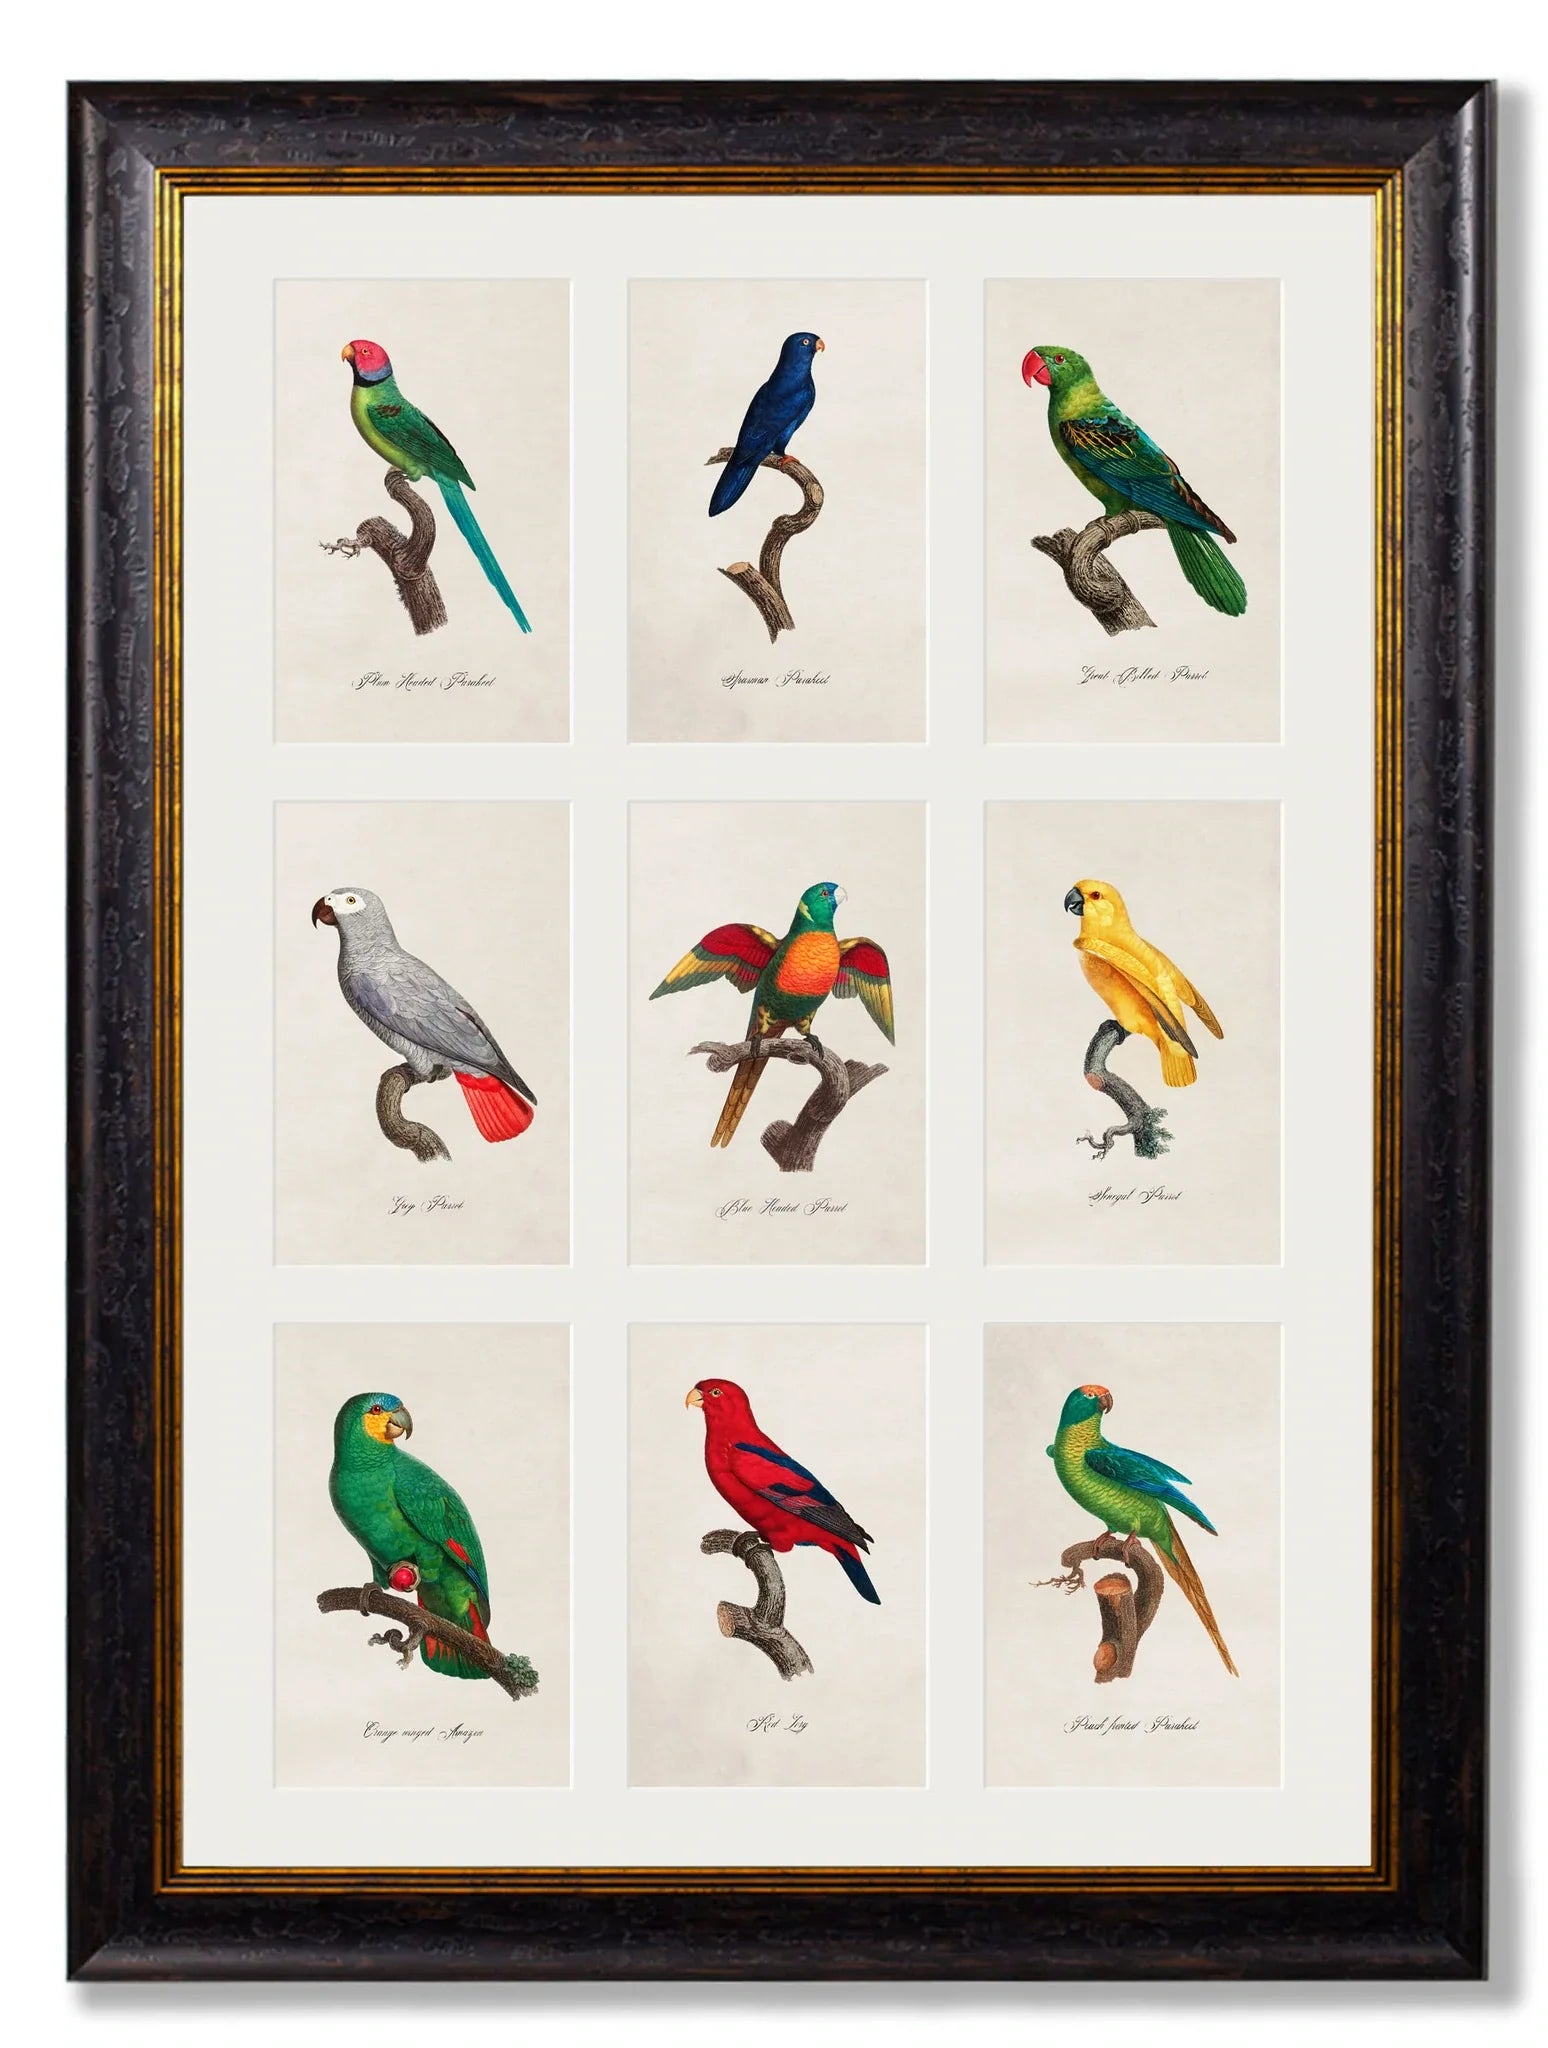 C.1833 Parrots Frame for sale - Woodcock and Cavendish